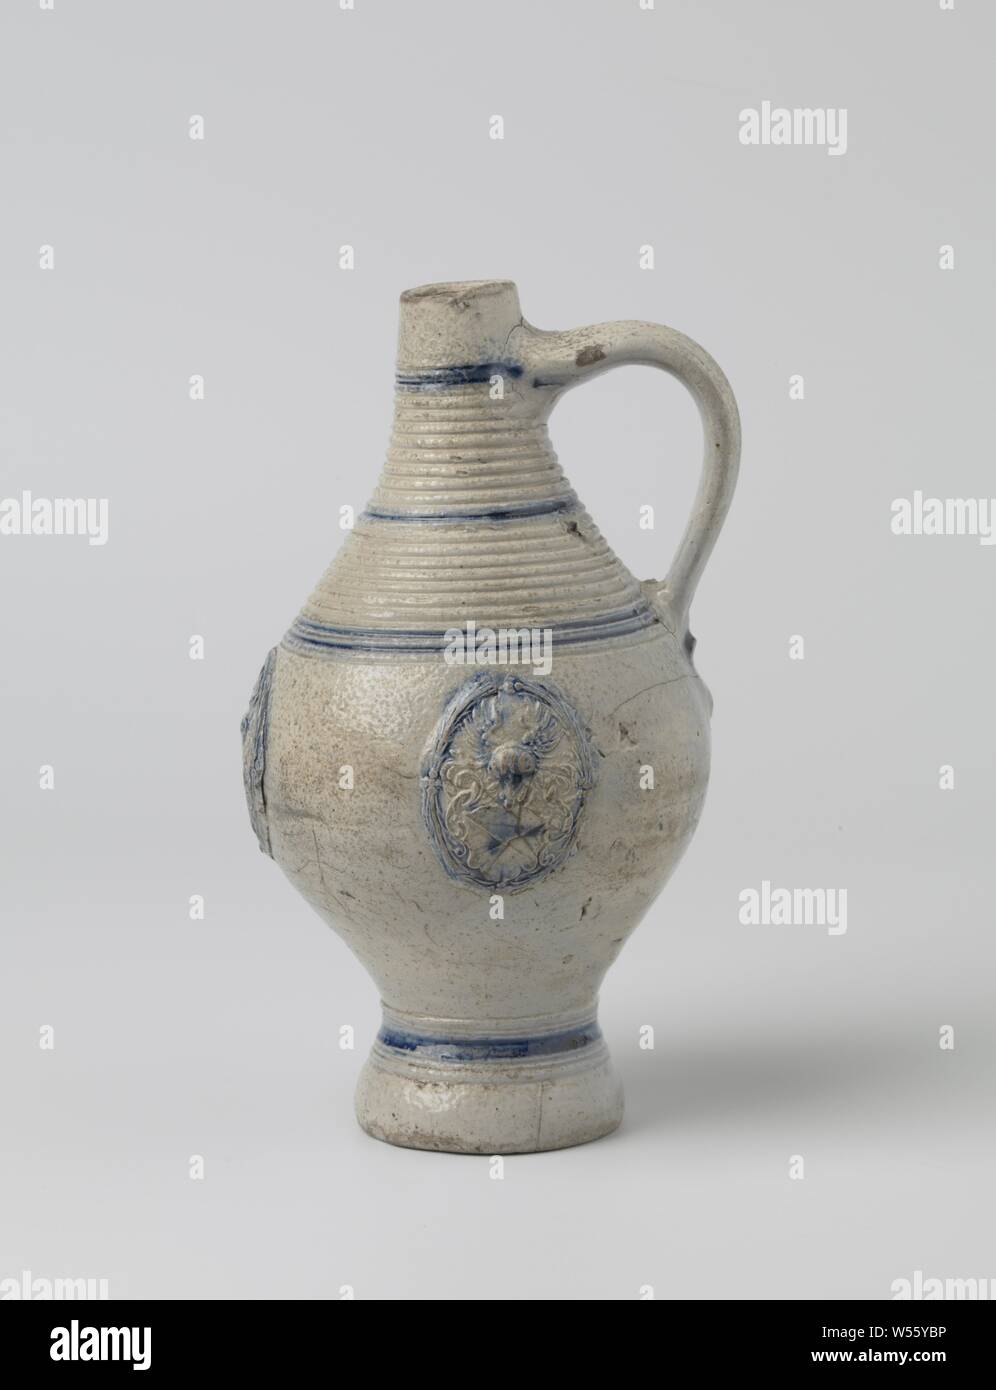 Jug with three coat of arms, Stoneware jug on high feet with an egg-shaped body and tapered neck. The C-shaped ear is attached to the neck and shoulder. A wide band of profiles on the neck and shoulder, some on the foot. Partially covered with cobalt blue. Three times a printed and imposed weapon on the abdomen with a cross on the shield, leaf vines and a winged helmet sign. Blue lines on the neck and foot. Westerwald., anonymous, Westerwald, c. 1600 - c. 1649, stoneware, glaze, cobalt (mineral), vitrification, h 20.2 cm d 2.7 cm d 11.1 cm d 6.5 cm w 11.7 cm Stock Photo